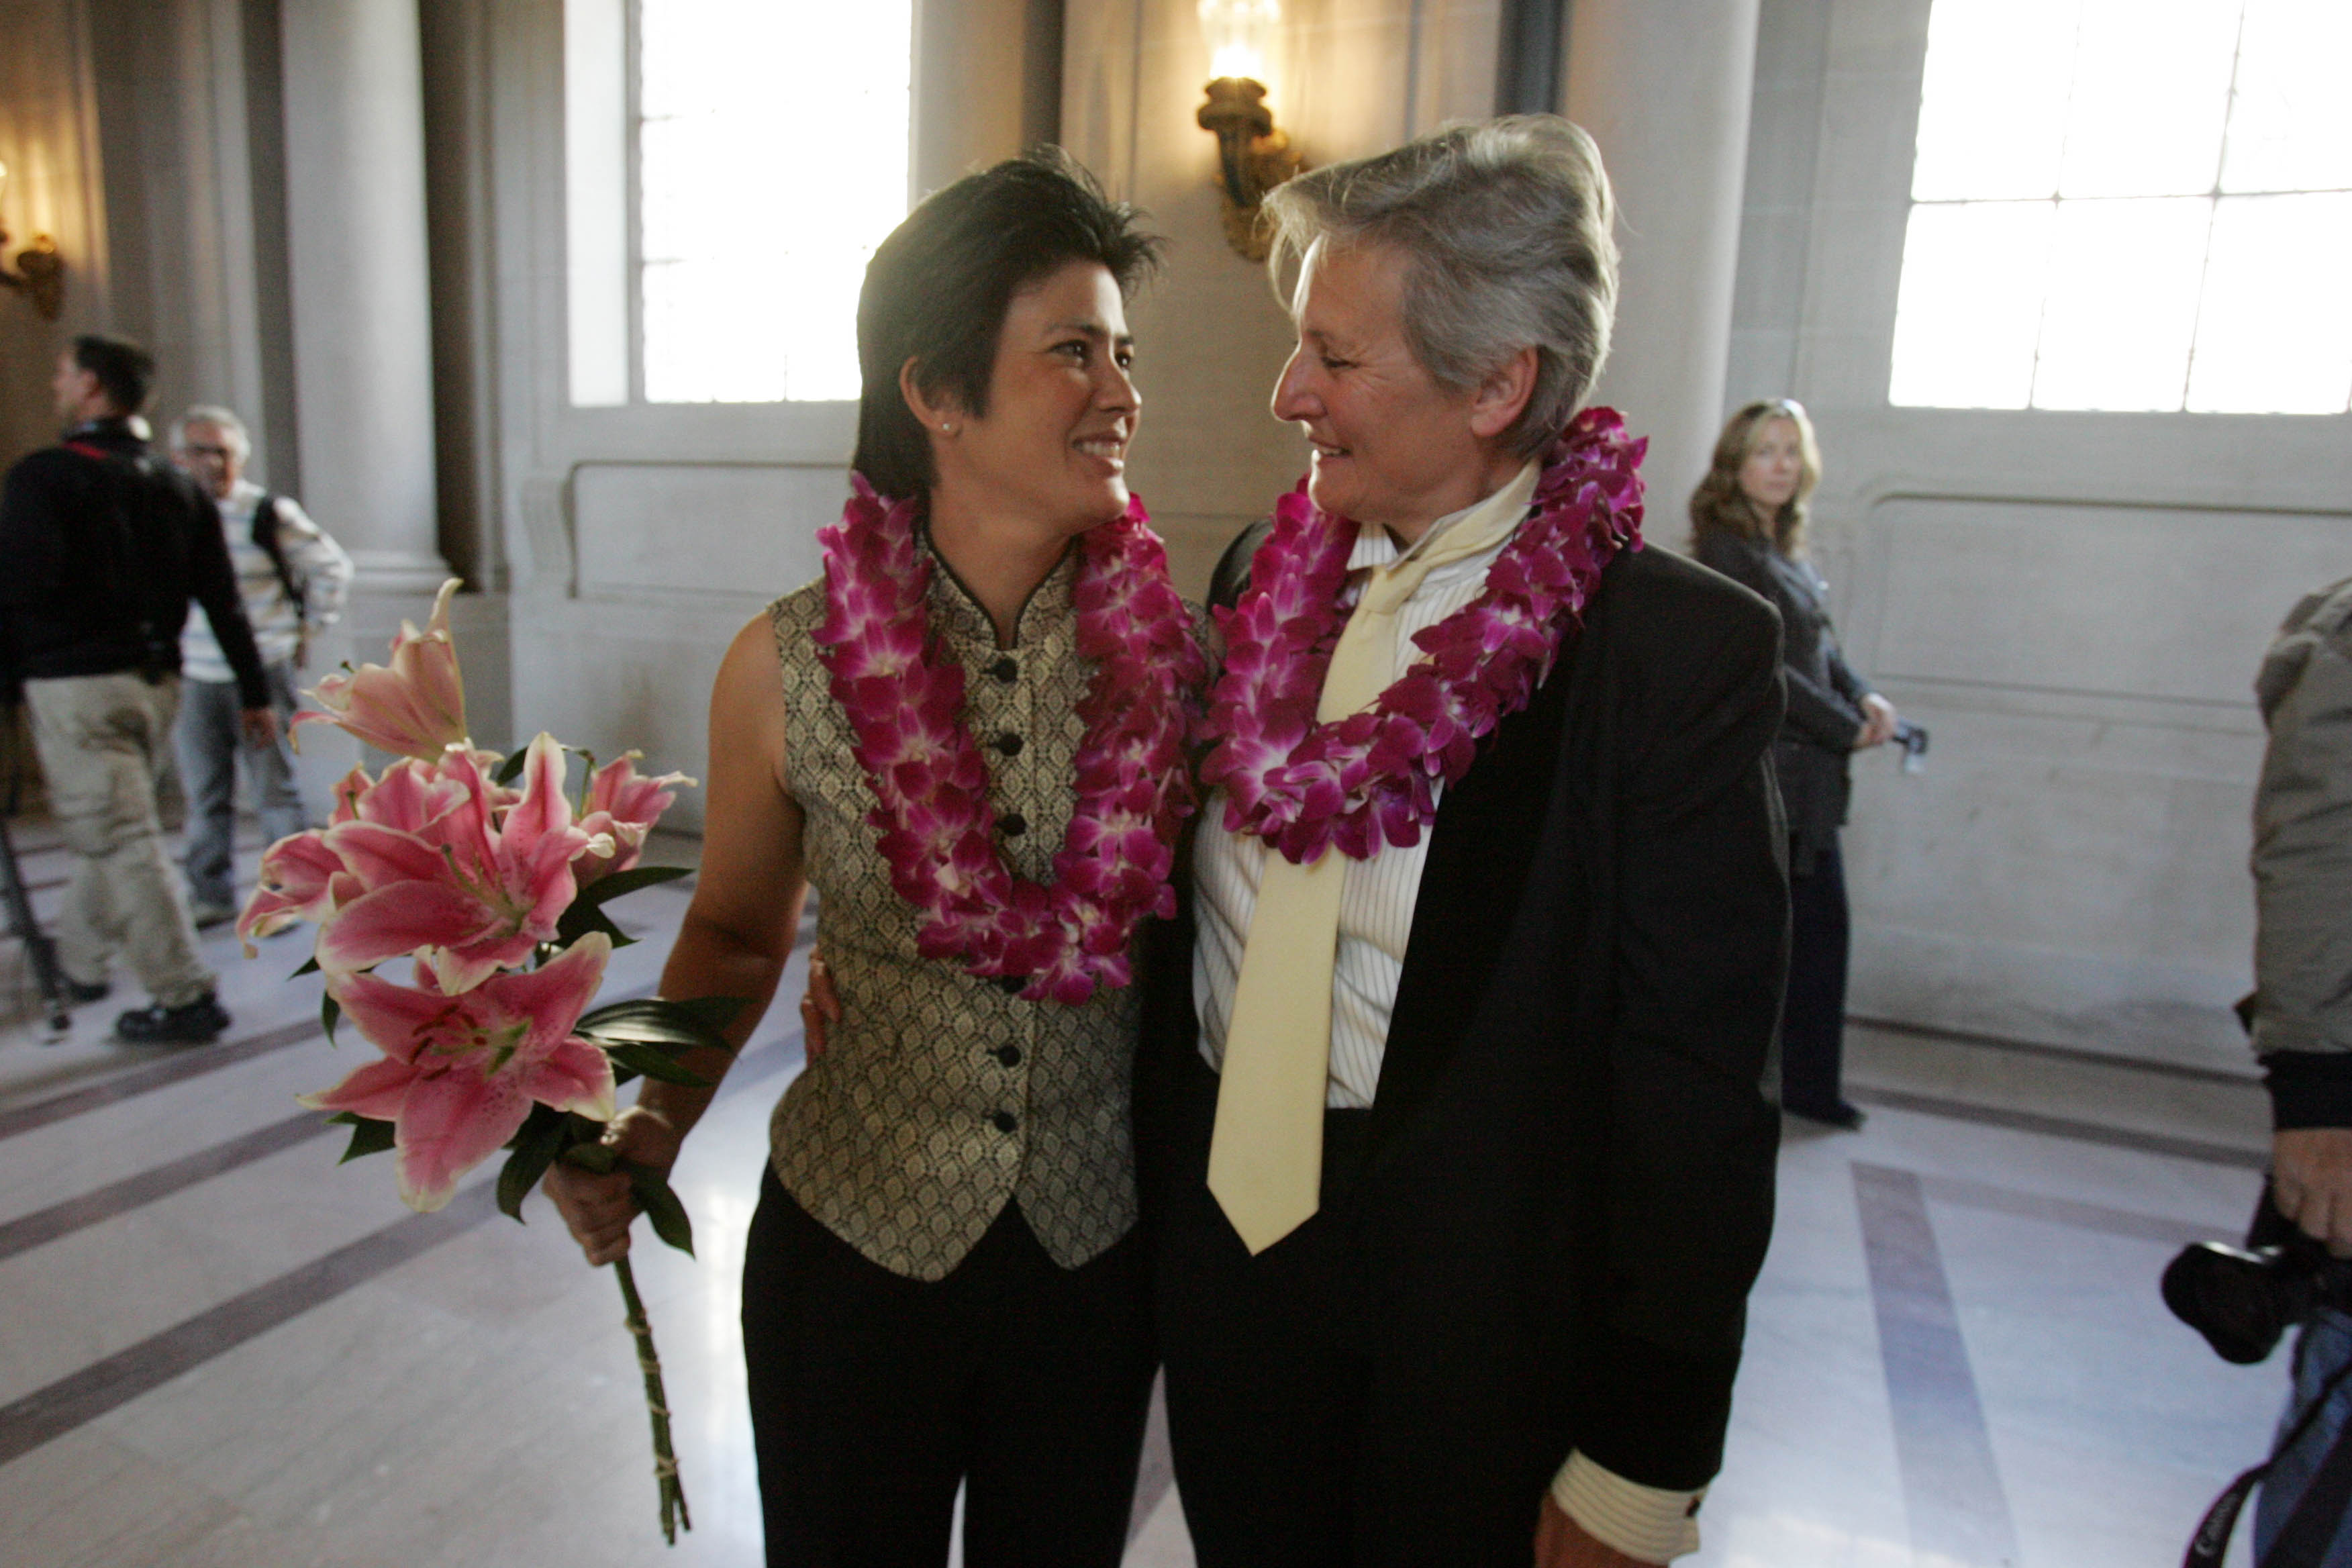 Gay couples wed in Calif.